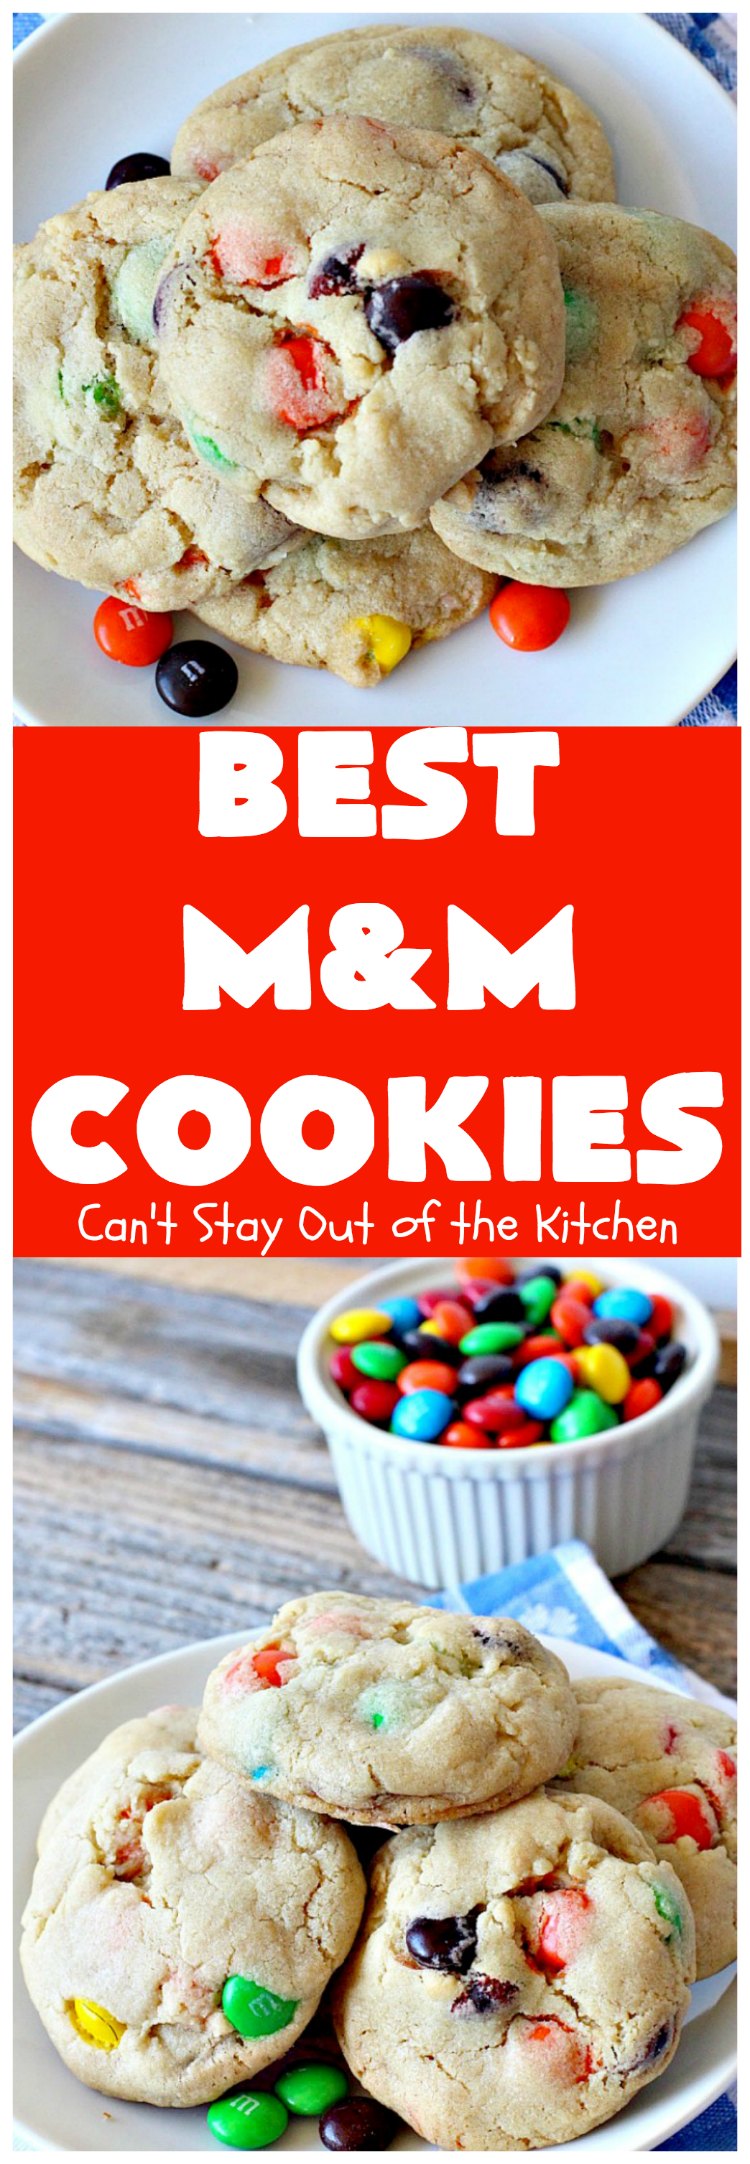 Best M&M Cookies | Can't Stay Out of the Kitchen